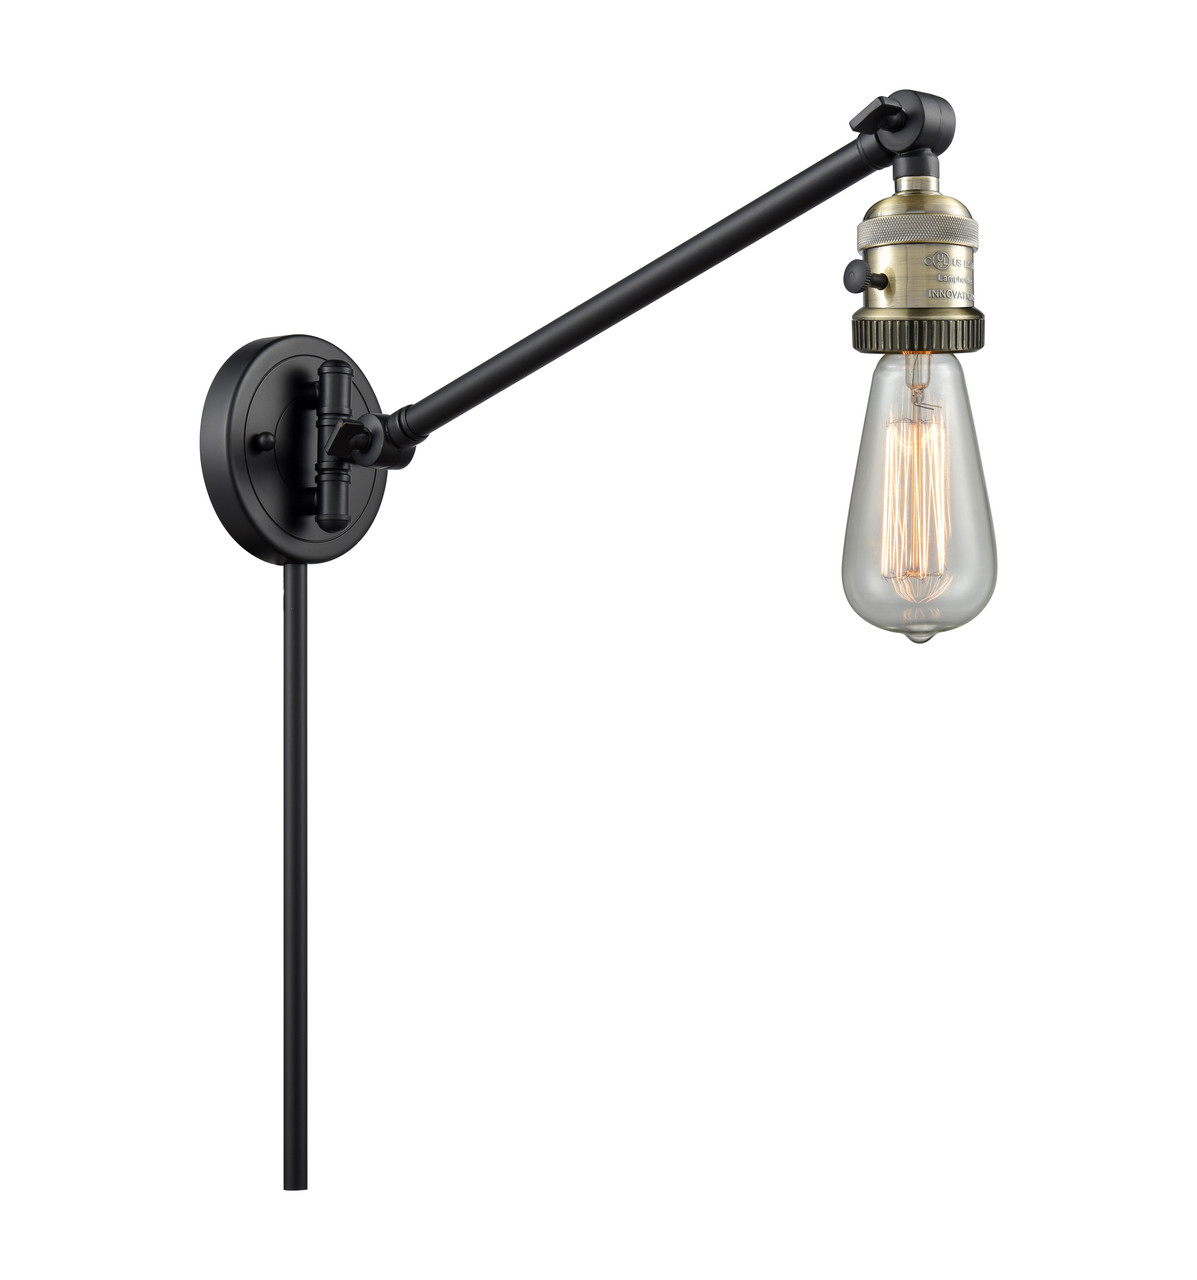 INNOVATIONS 237-BAB Bare Bulb 1 Light 5 inch Swing Arm With Switch Black Antique Brass